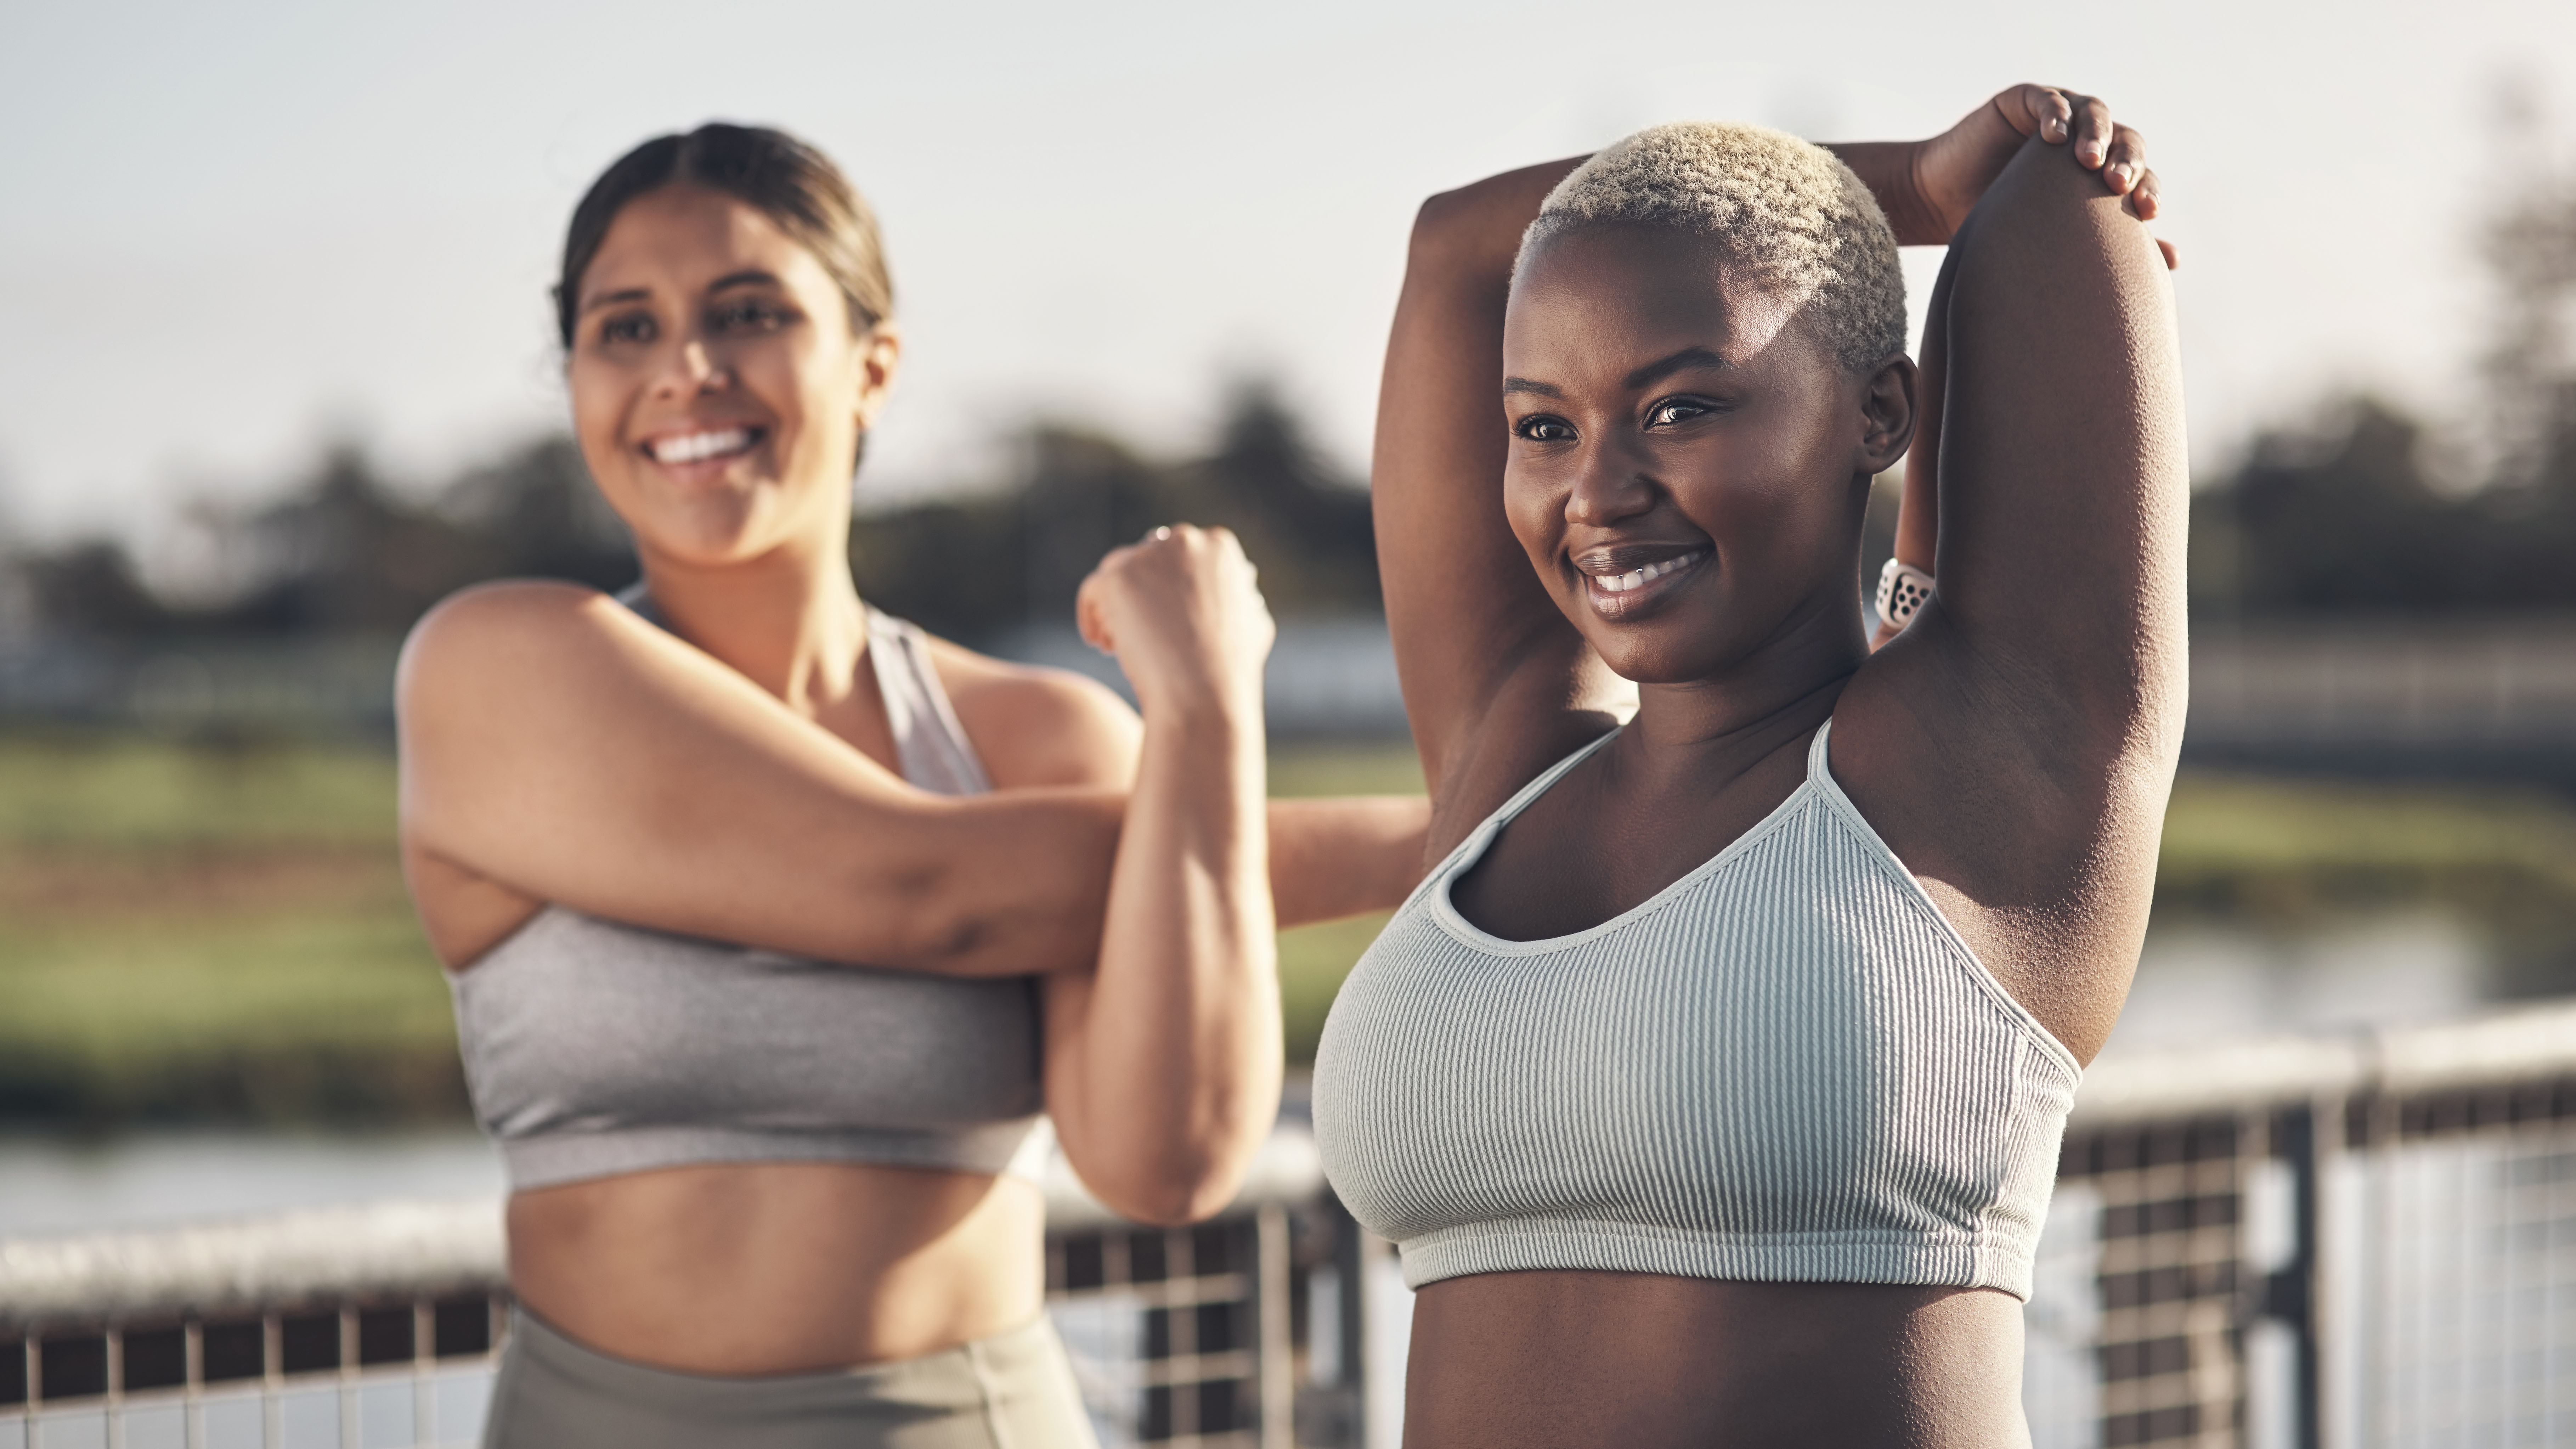 How To Take Care of Your Adjustable Sports Bras and Other Activewear